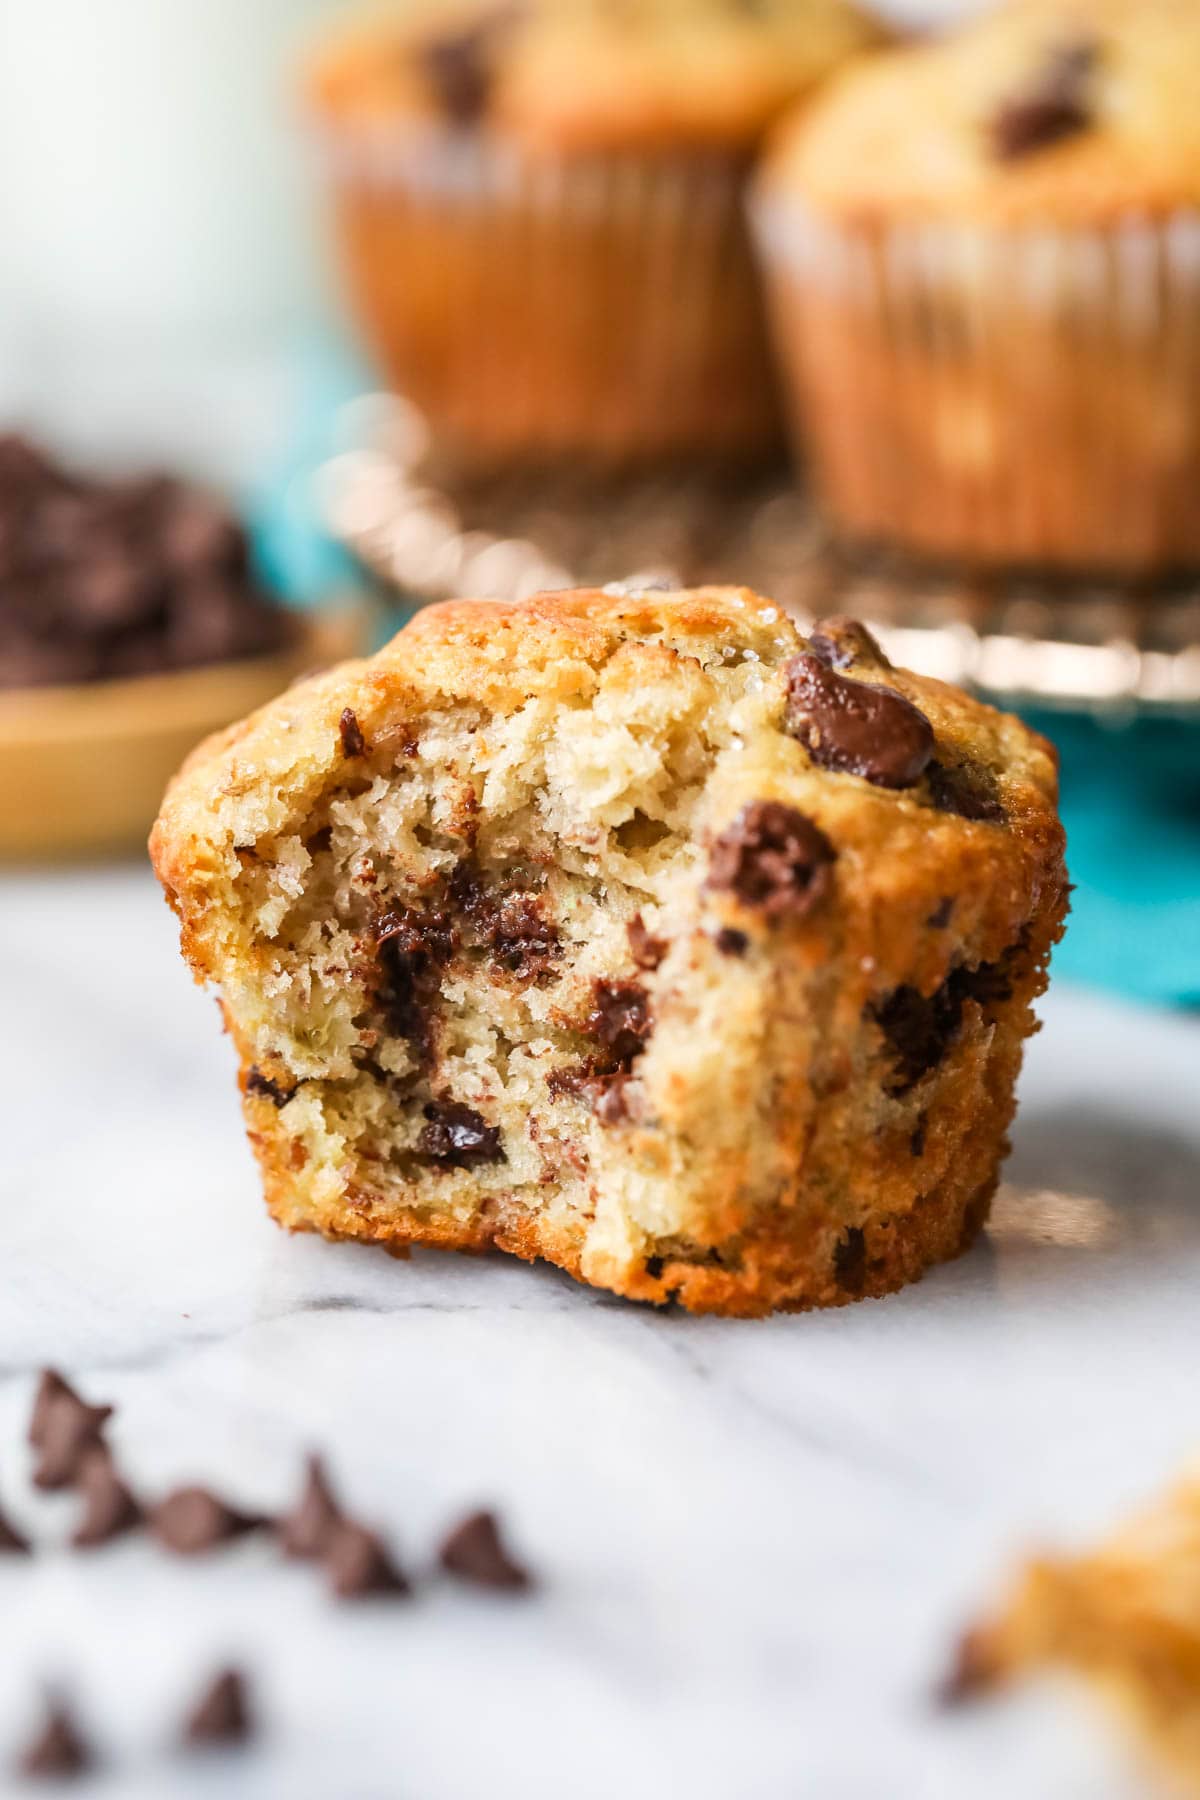 Chocolate chip banana muffin with one bite missing.